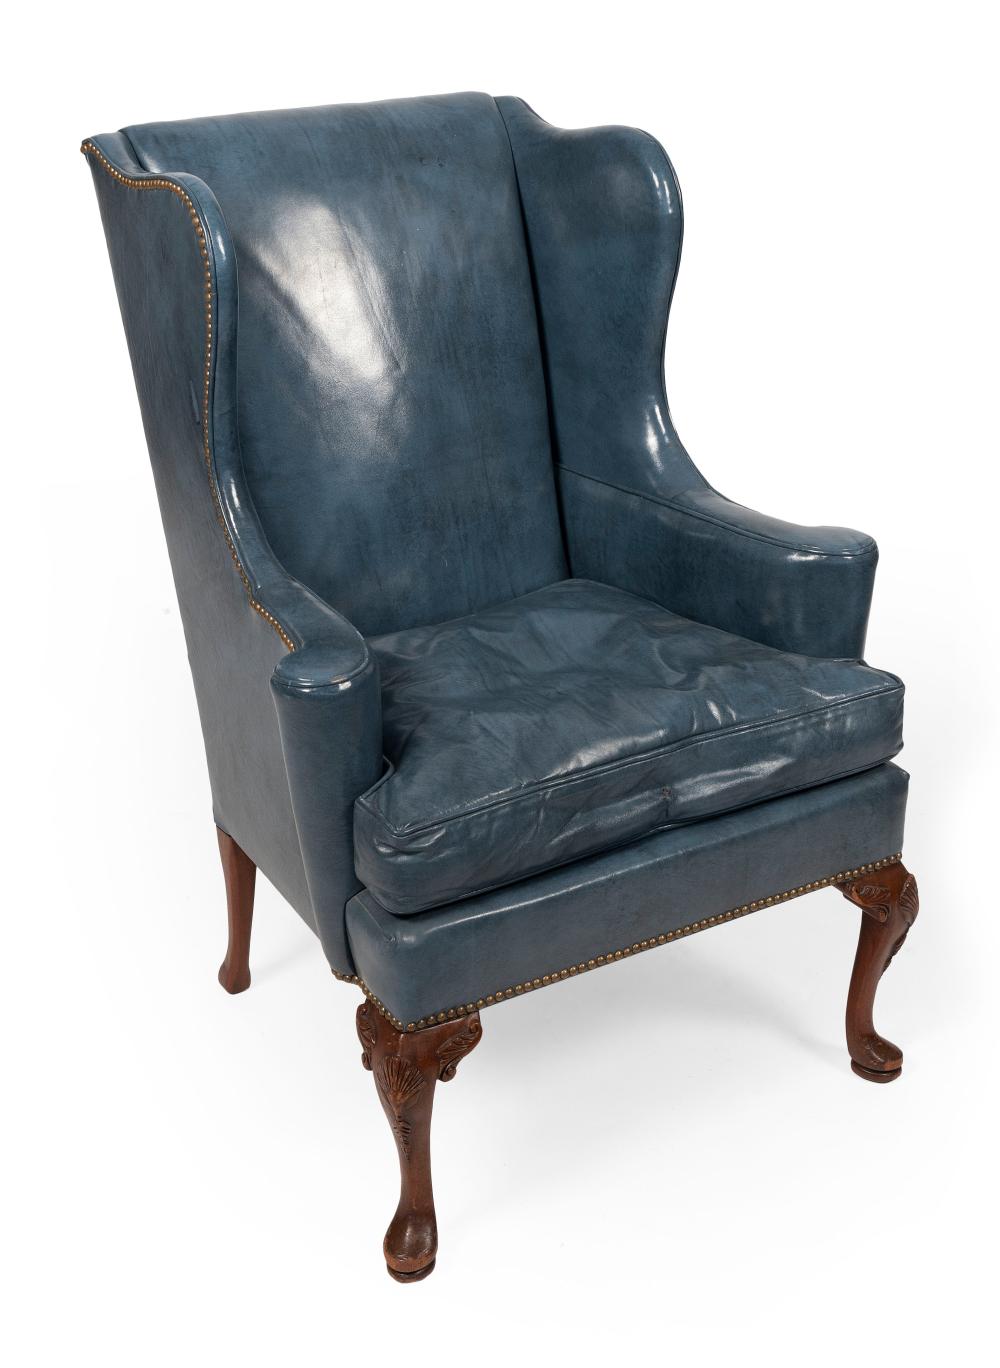 HICKORY CHAIR COMPANY LEATHER WING 34efc7